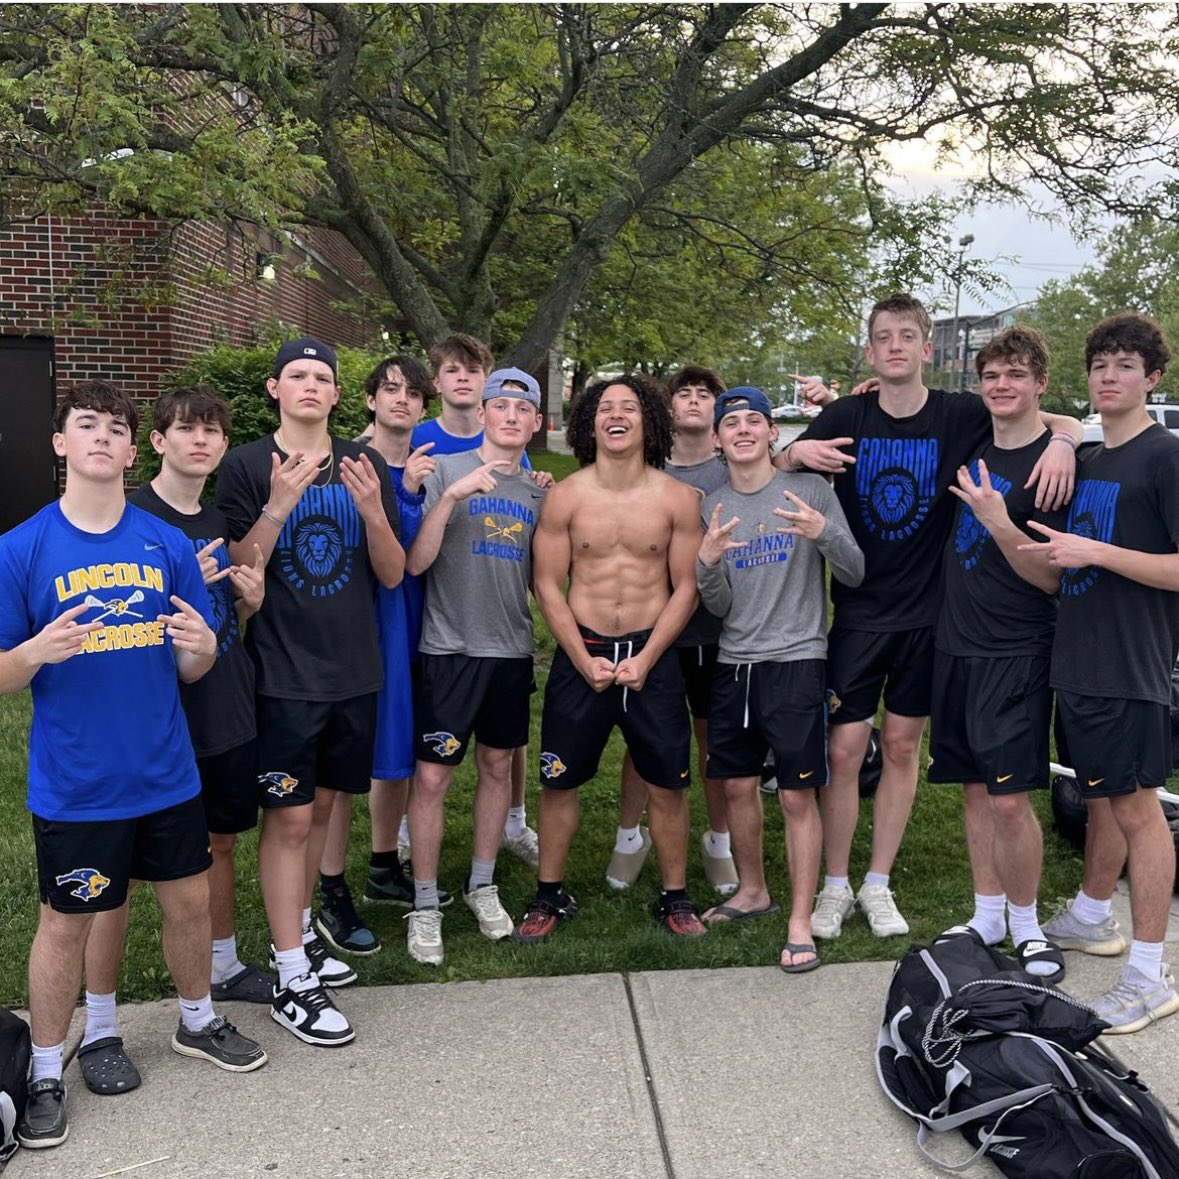 Boys Win 10-9 over Westerville South! Goals scored by Tyler Broshar (3), Jack Pabst (2), Cole Gervais (2), Eddie Jennings, Cory Mason, and Eric Shockney!